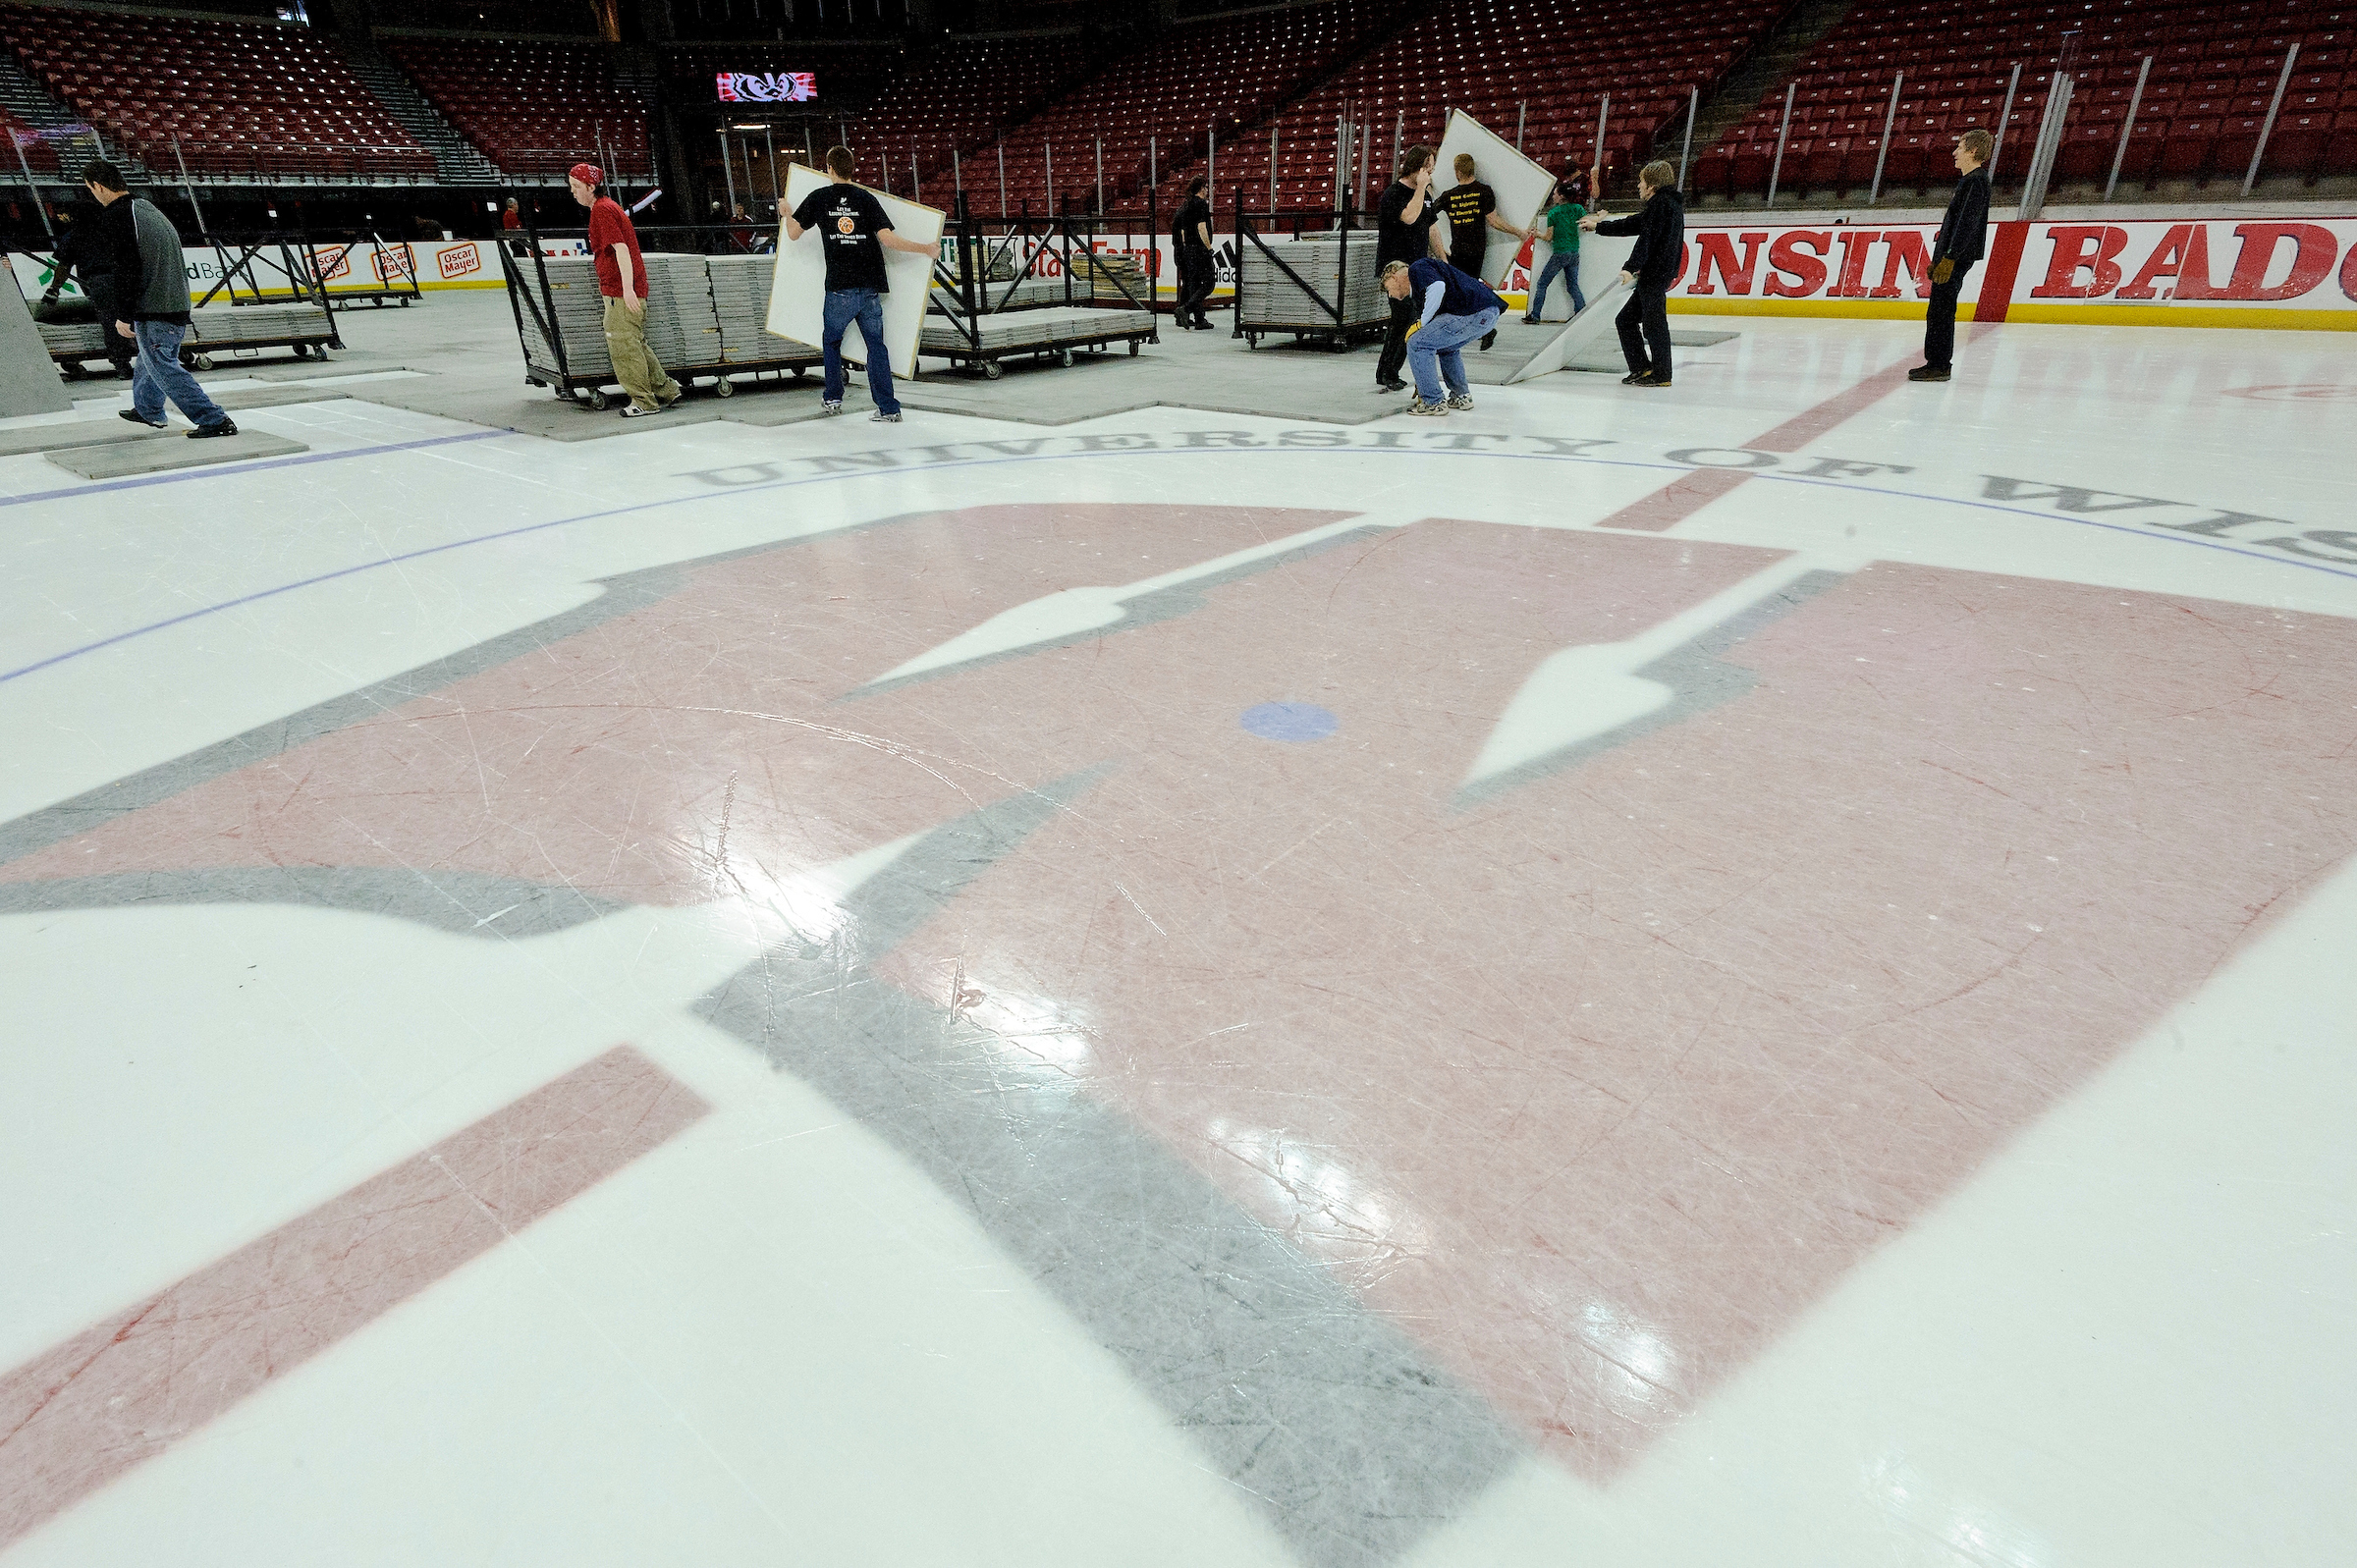 Workers remove the basketball court, revealing the ice underneath